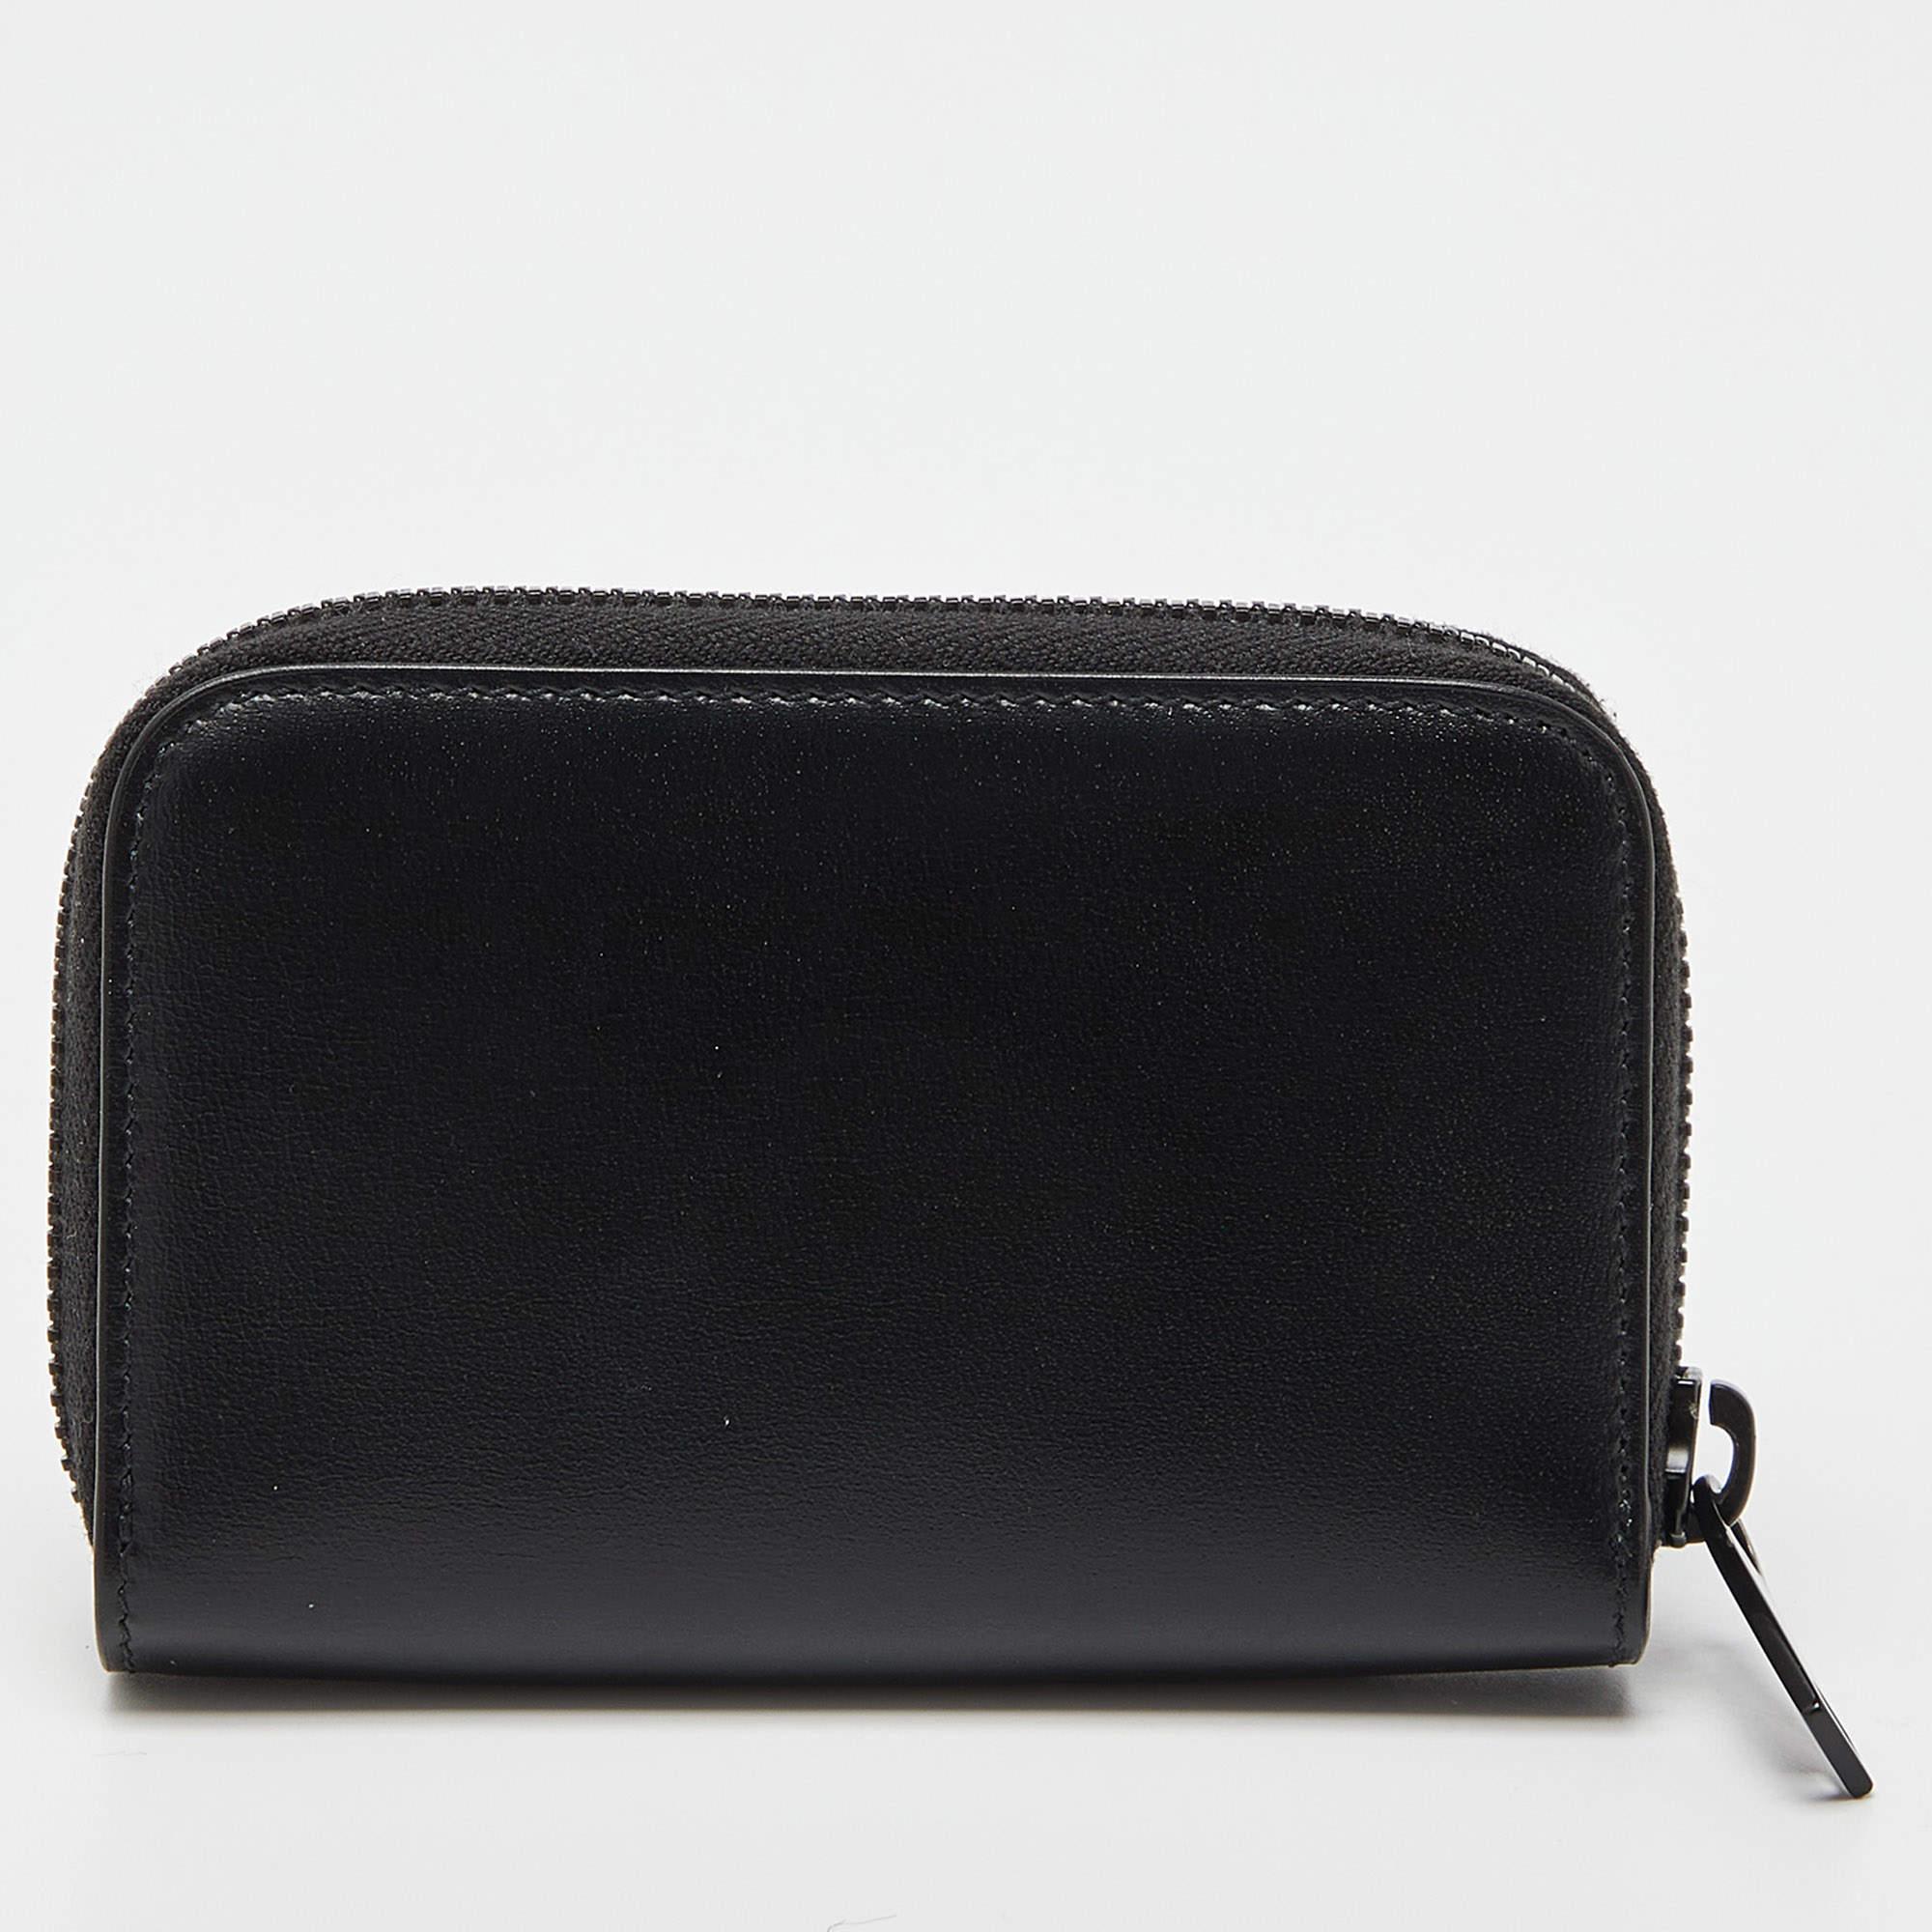 This Saint Laurent wallet is an immaculate balance of sophistication and rational utility. It has been designed using prime quality materials and elevated by a sleek finish. The creation is equipped with ample space for your monetary